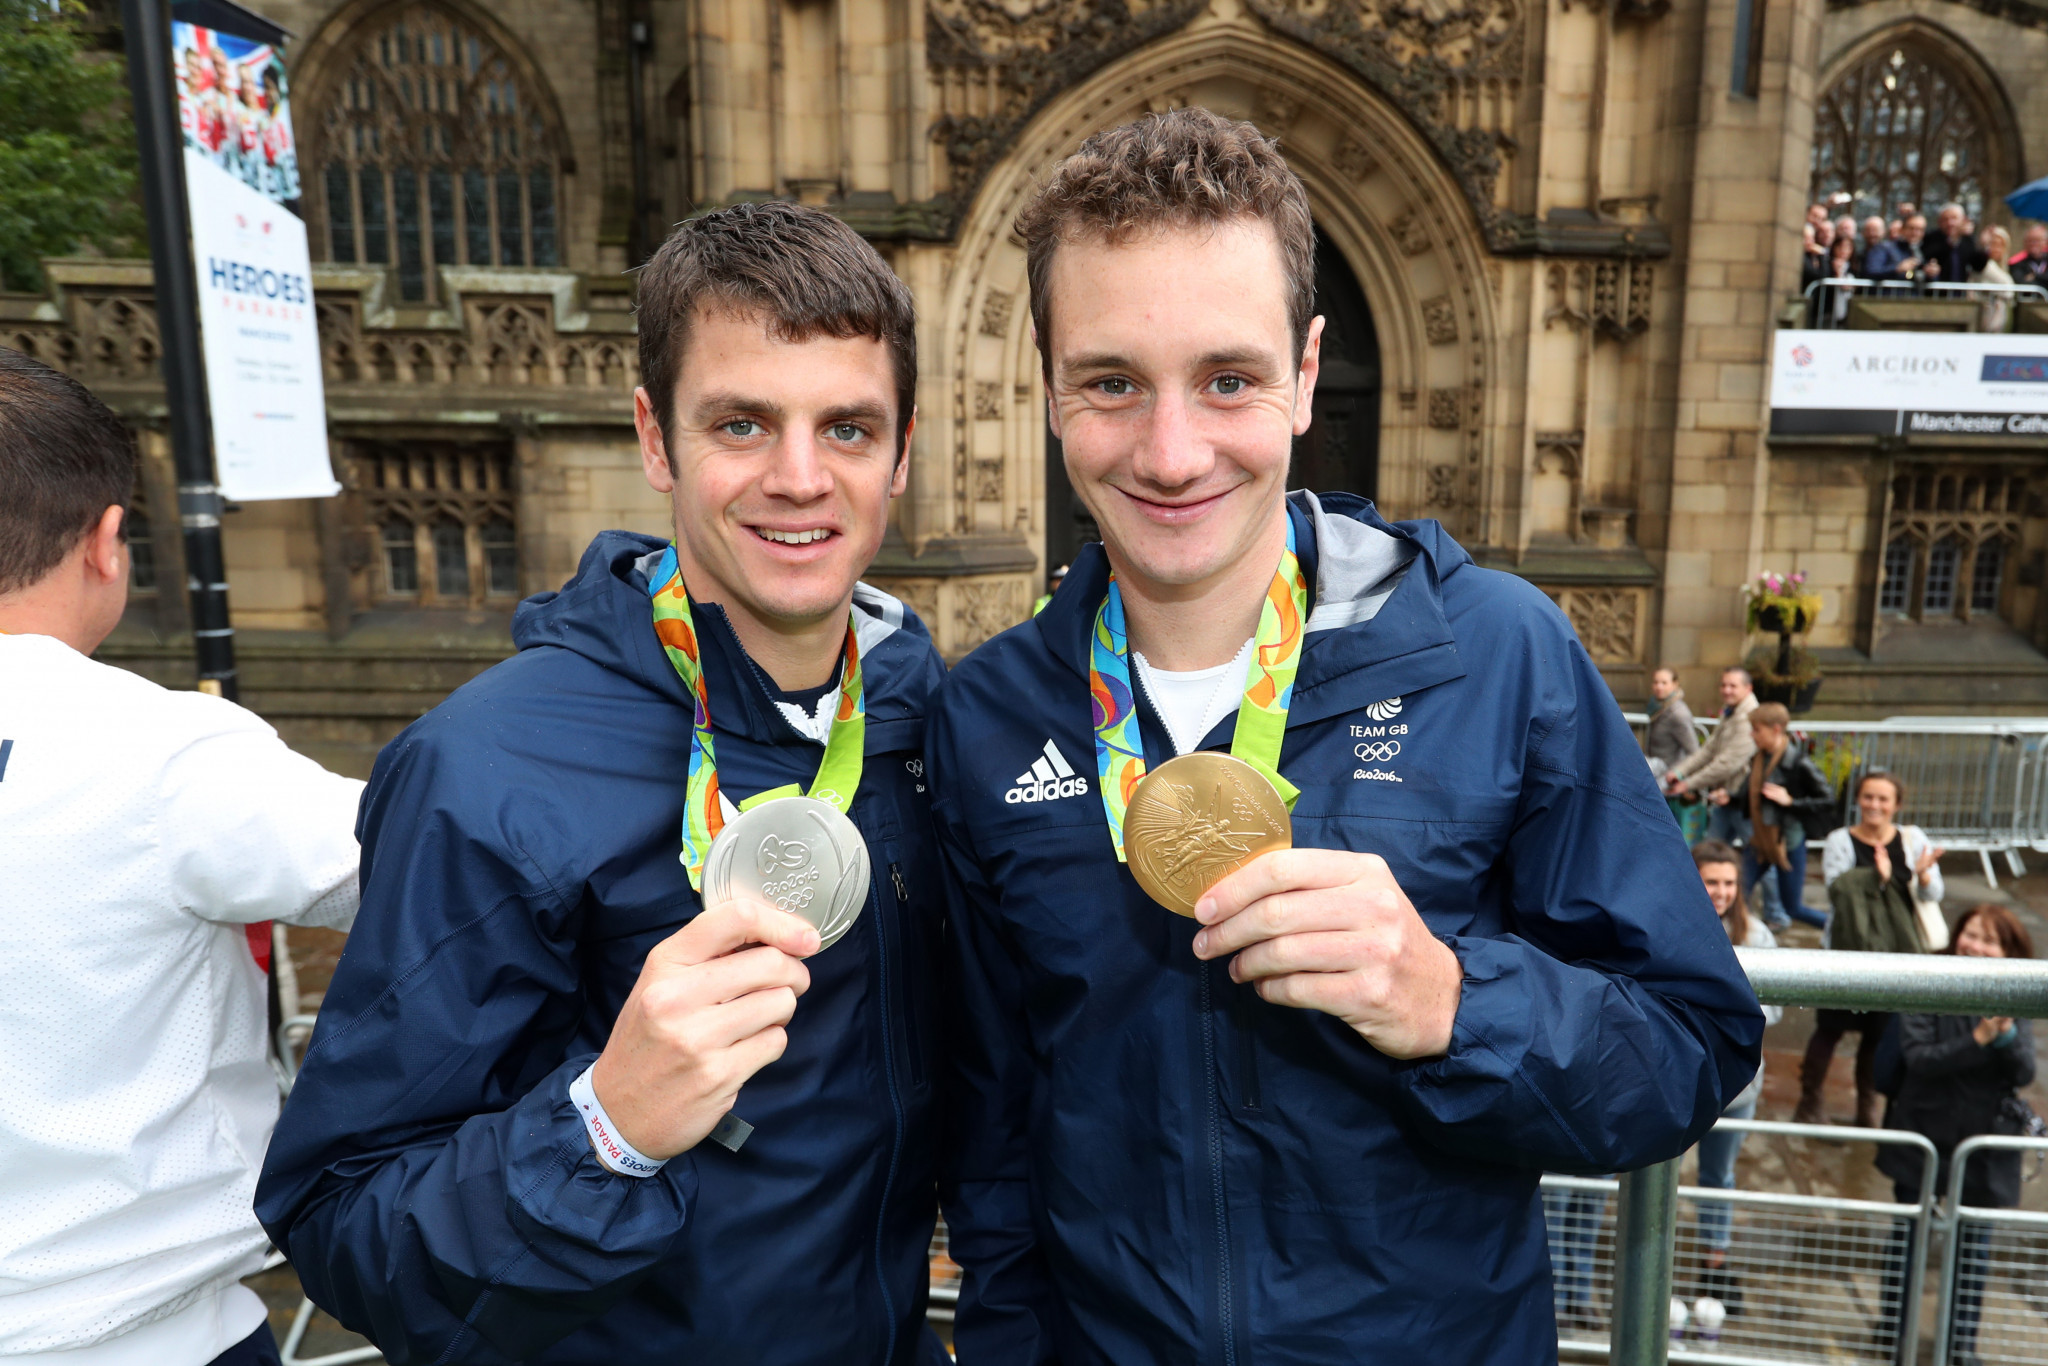 Alistair Brownlee, right, co-founded the Brownlee Foundation with brother Jonny Brownlee, left, in 2014 ©Getty Images